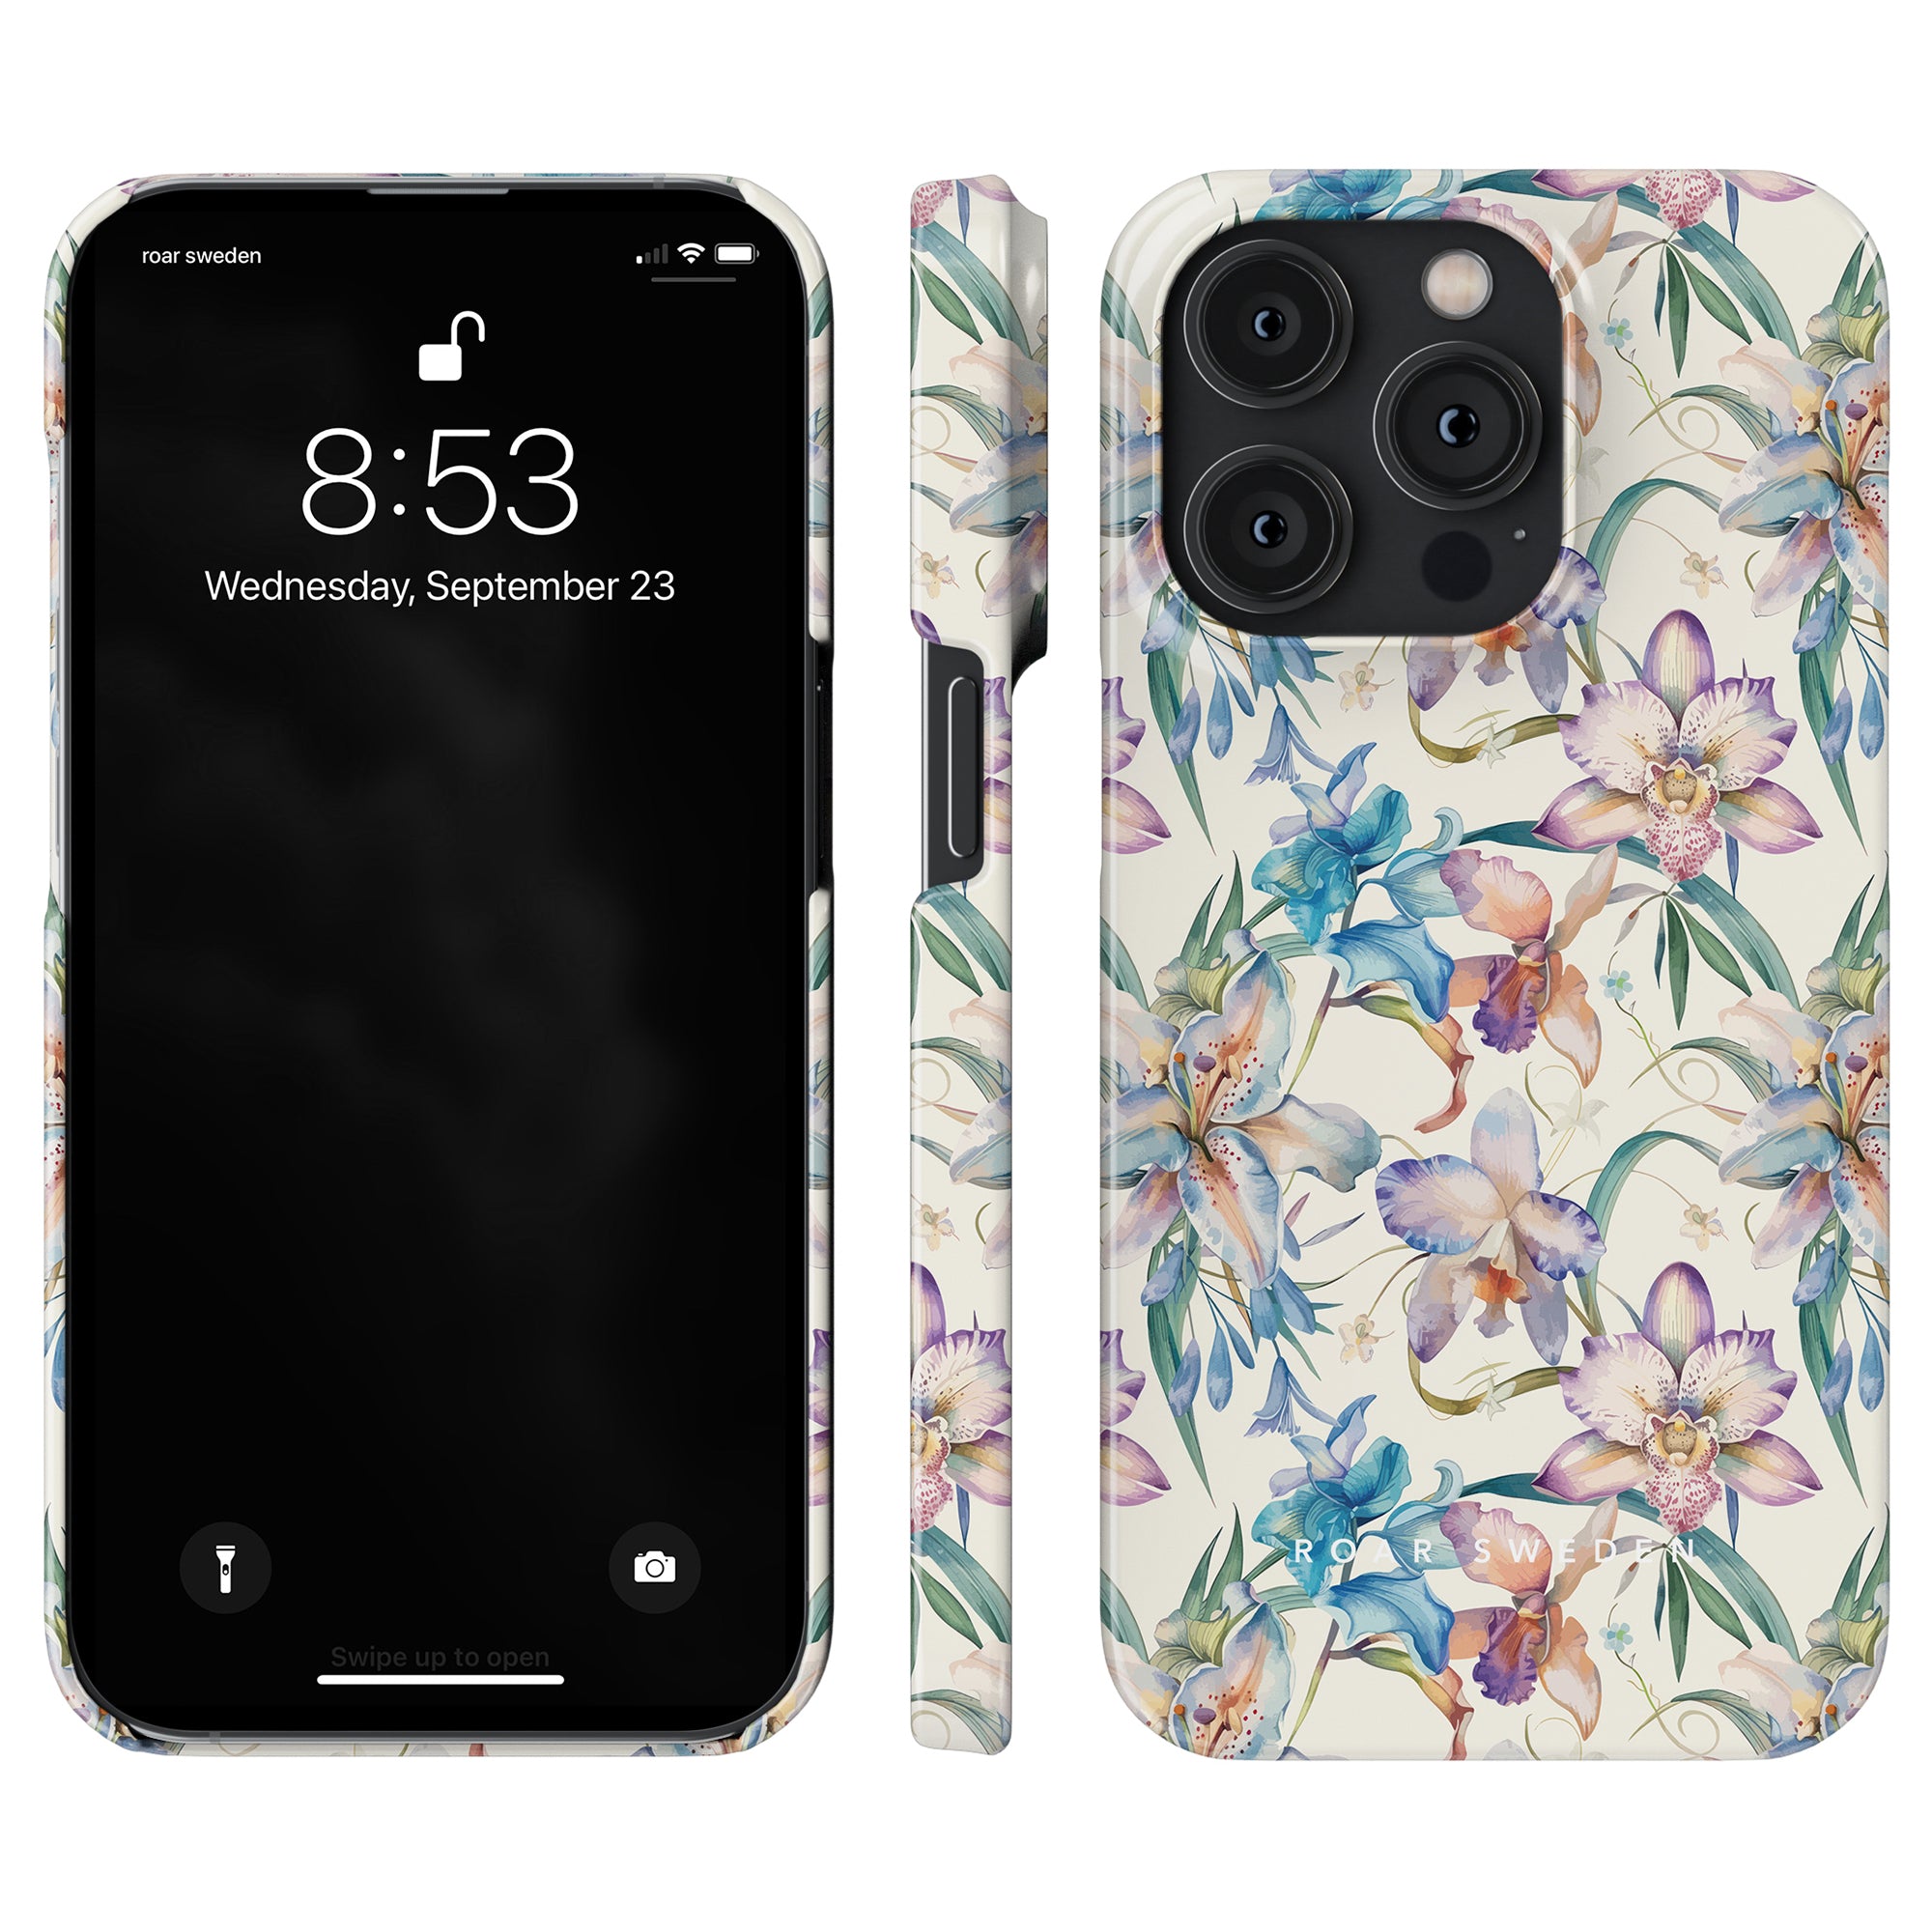 A smartphone with a Bouquet - Slim Case features colorful flowers on a white background. The screen displays the time 8:53, date Wednesday, September 23, and a swipe to unlock prompt, providing both elegance and smartphone protection.